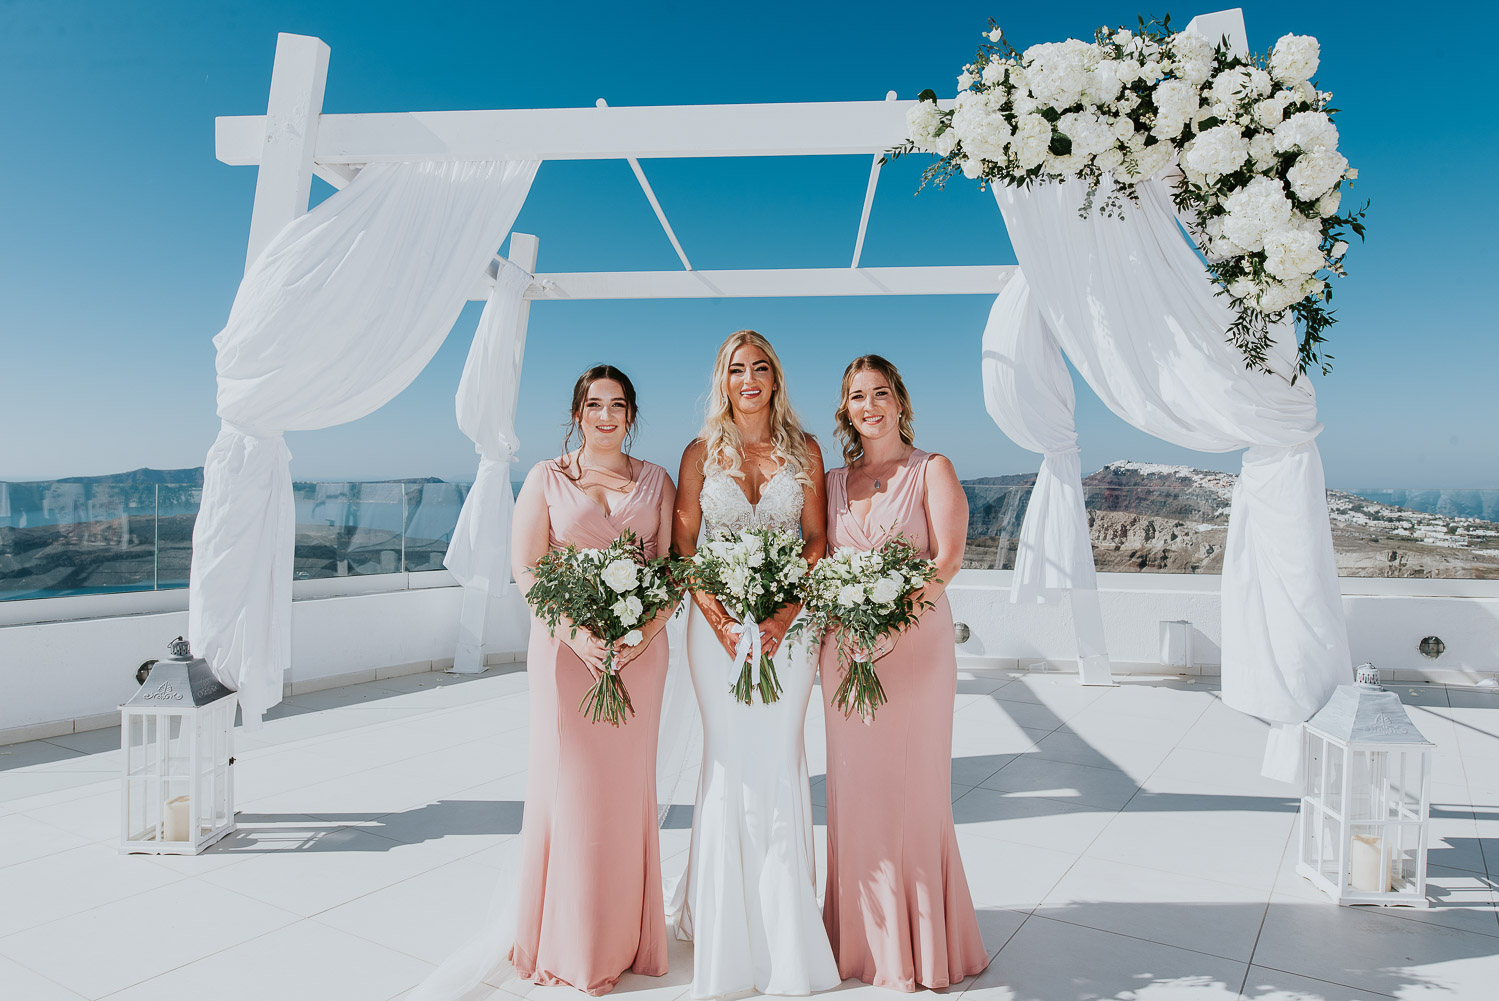 Wedding photographer Santorini: bride and her bridesmaids holding their beautiful bouquets by Ben and Vesna.